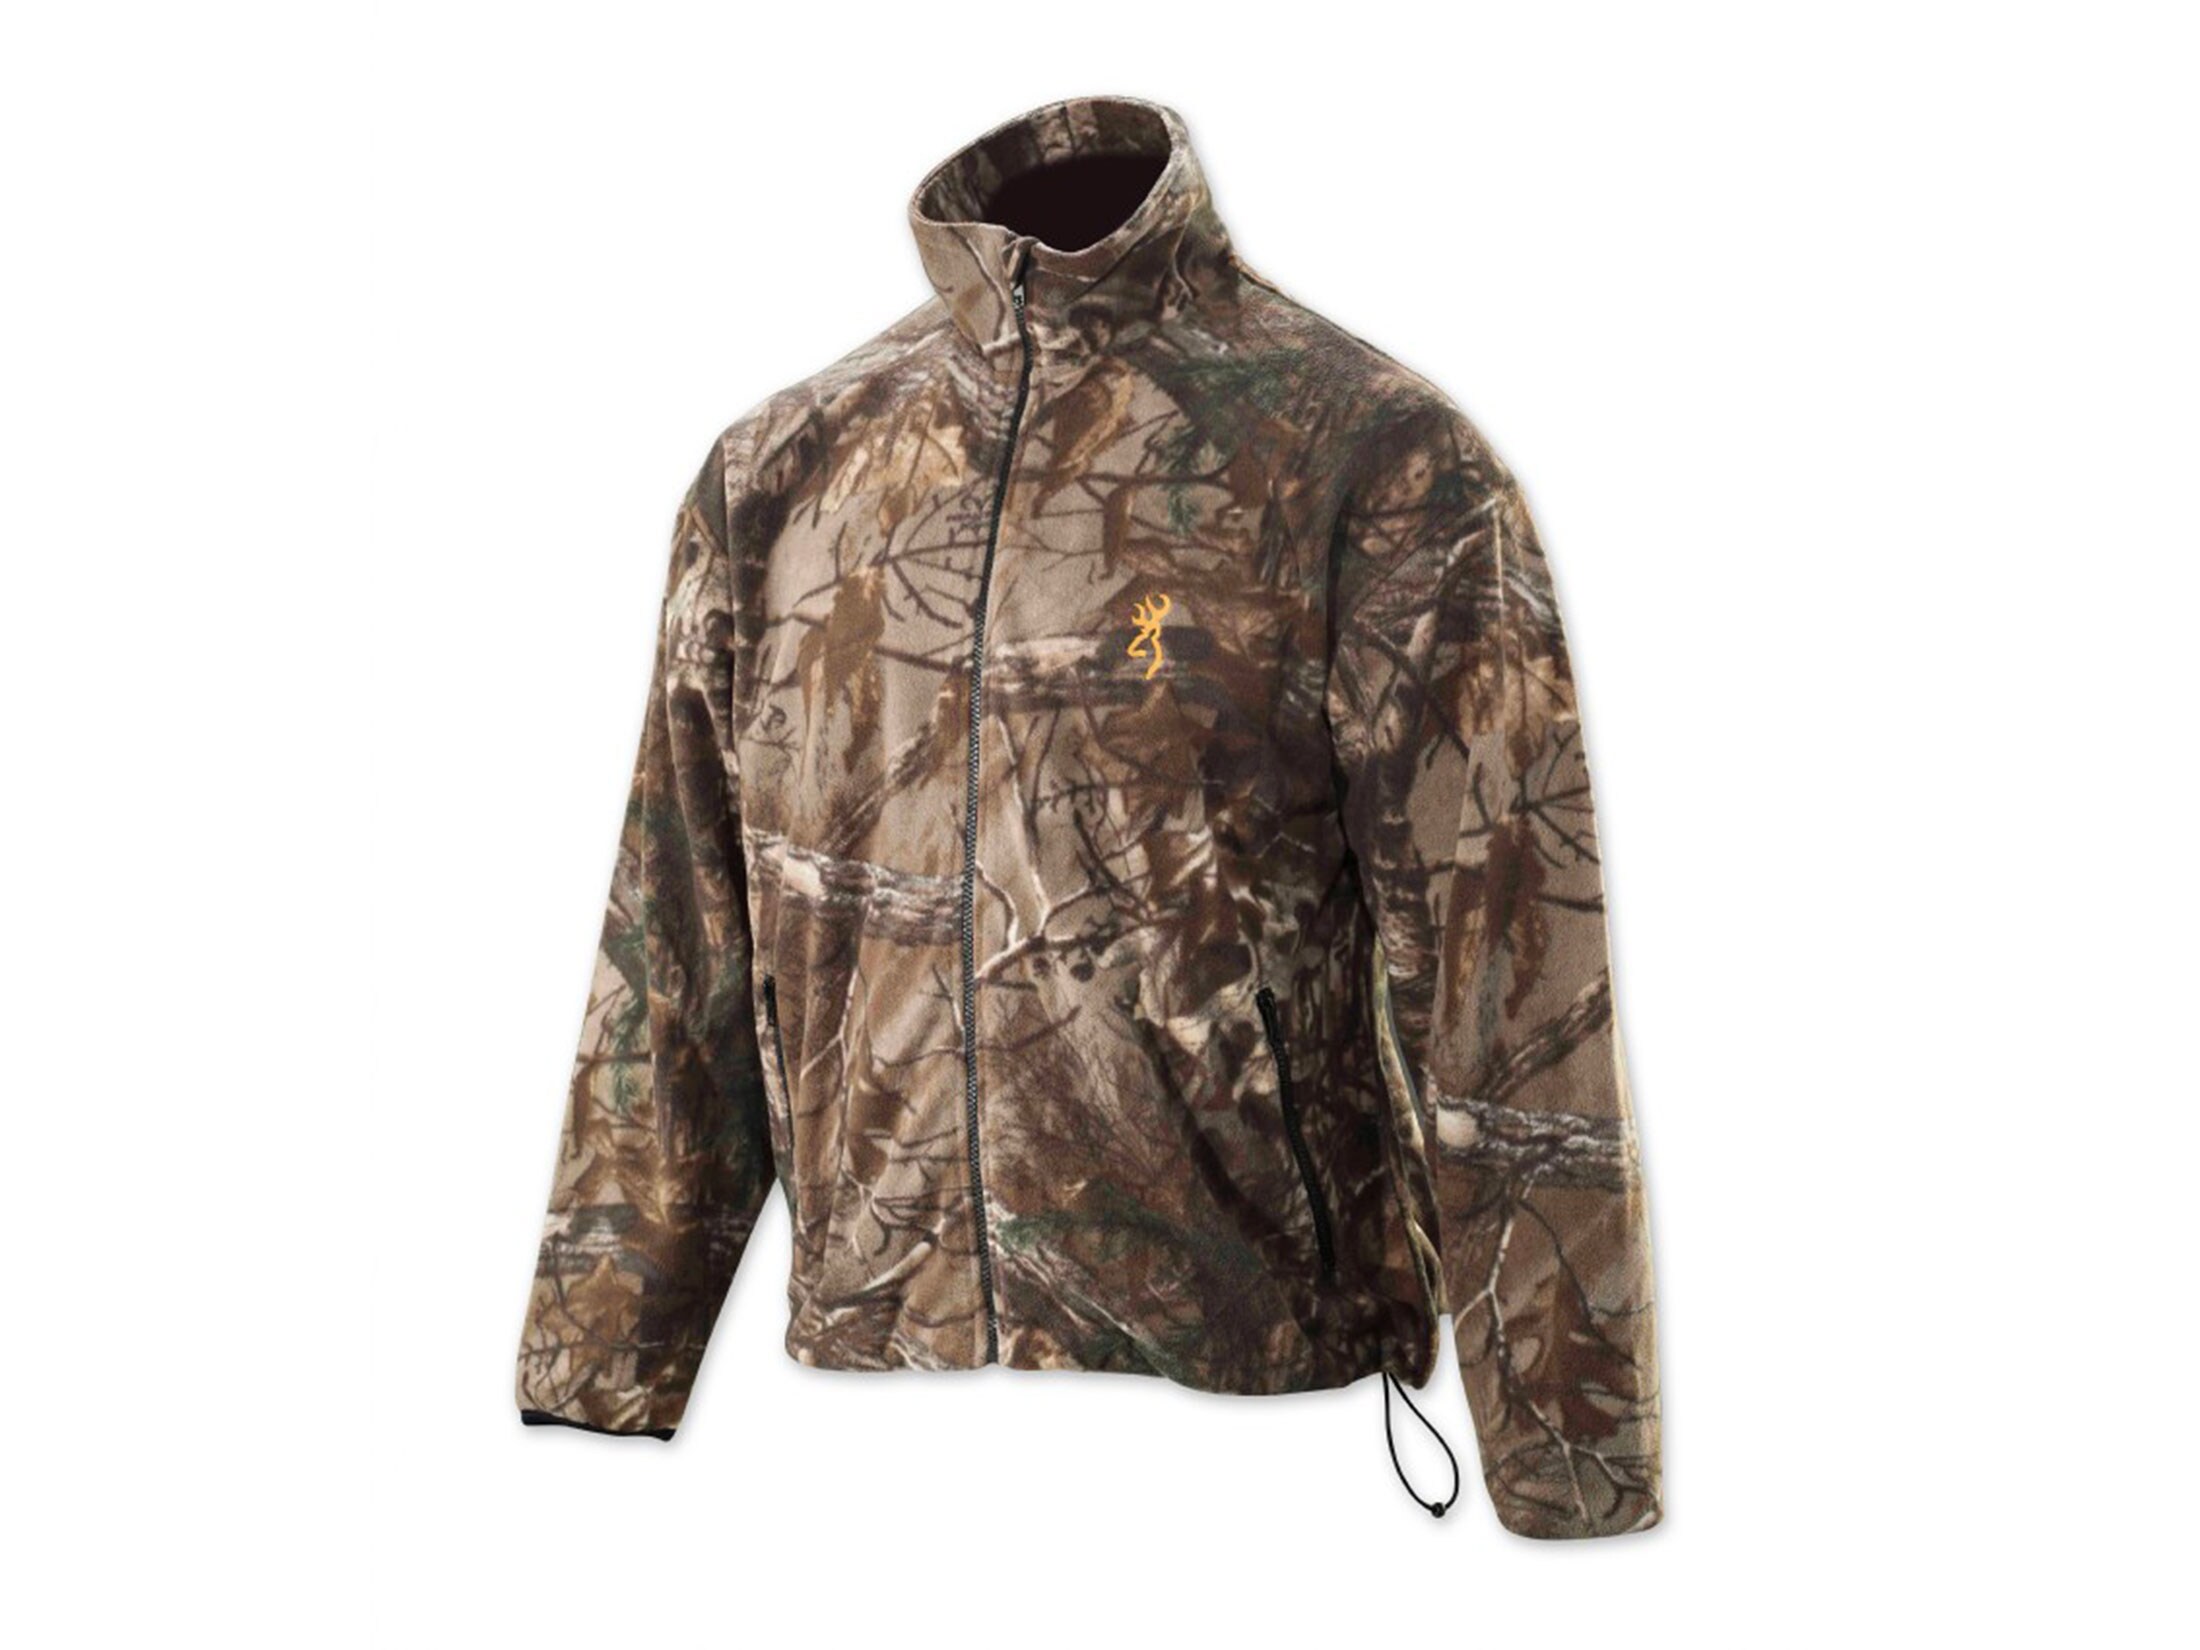 Browning Men's Wasatch Fleece Jacket Realtree Xtra Camo Large